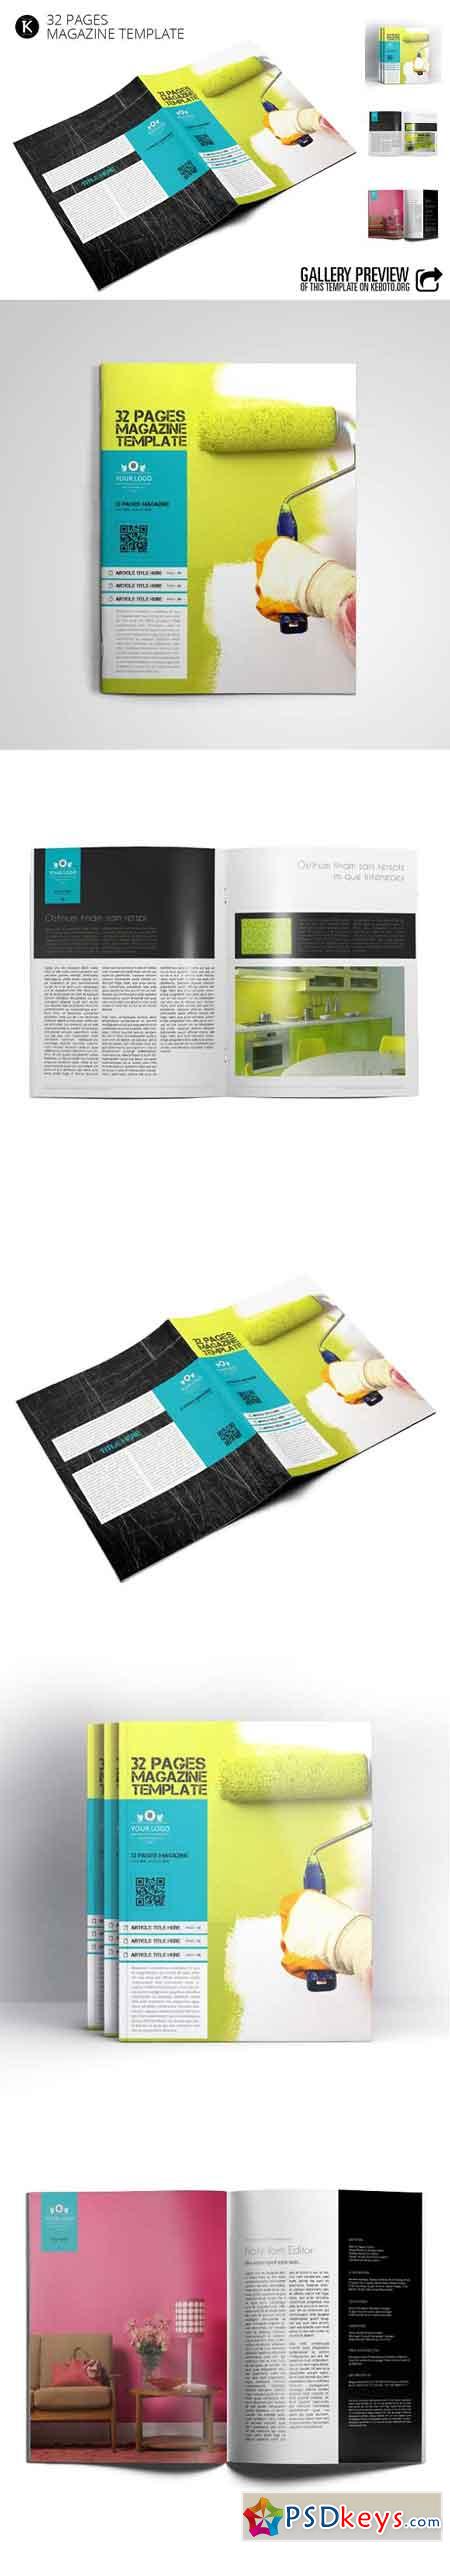 32 Pages Magazine Template 1039172